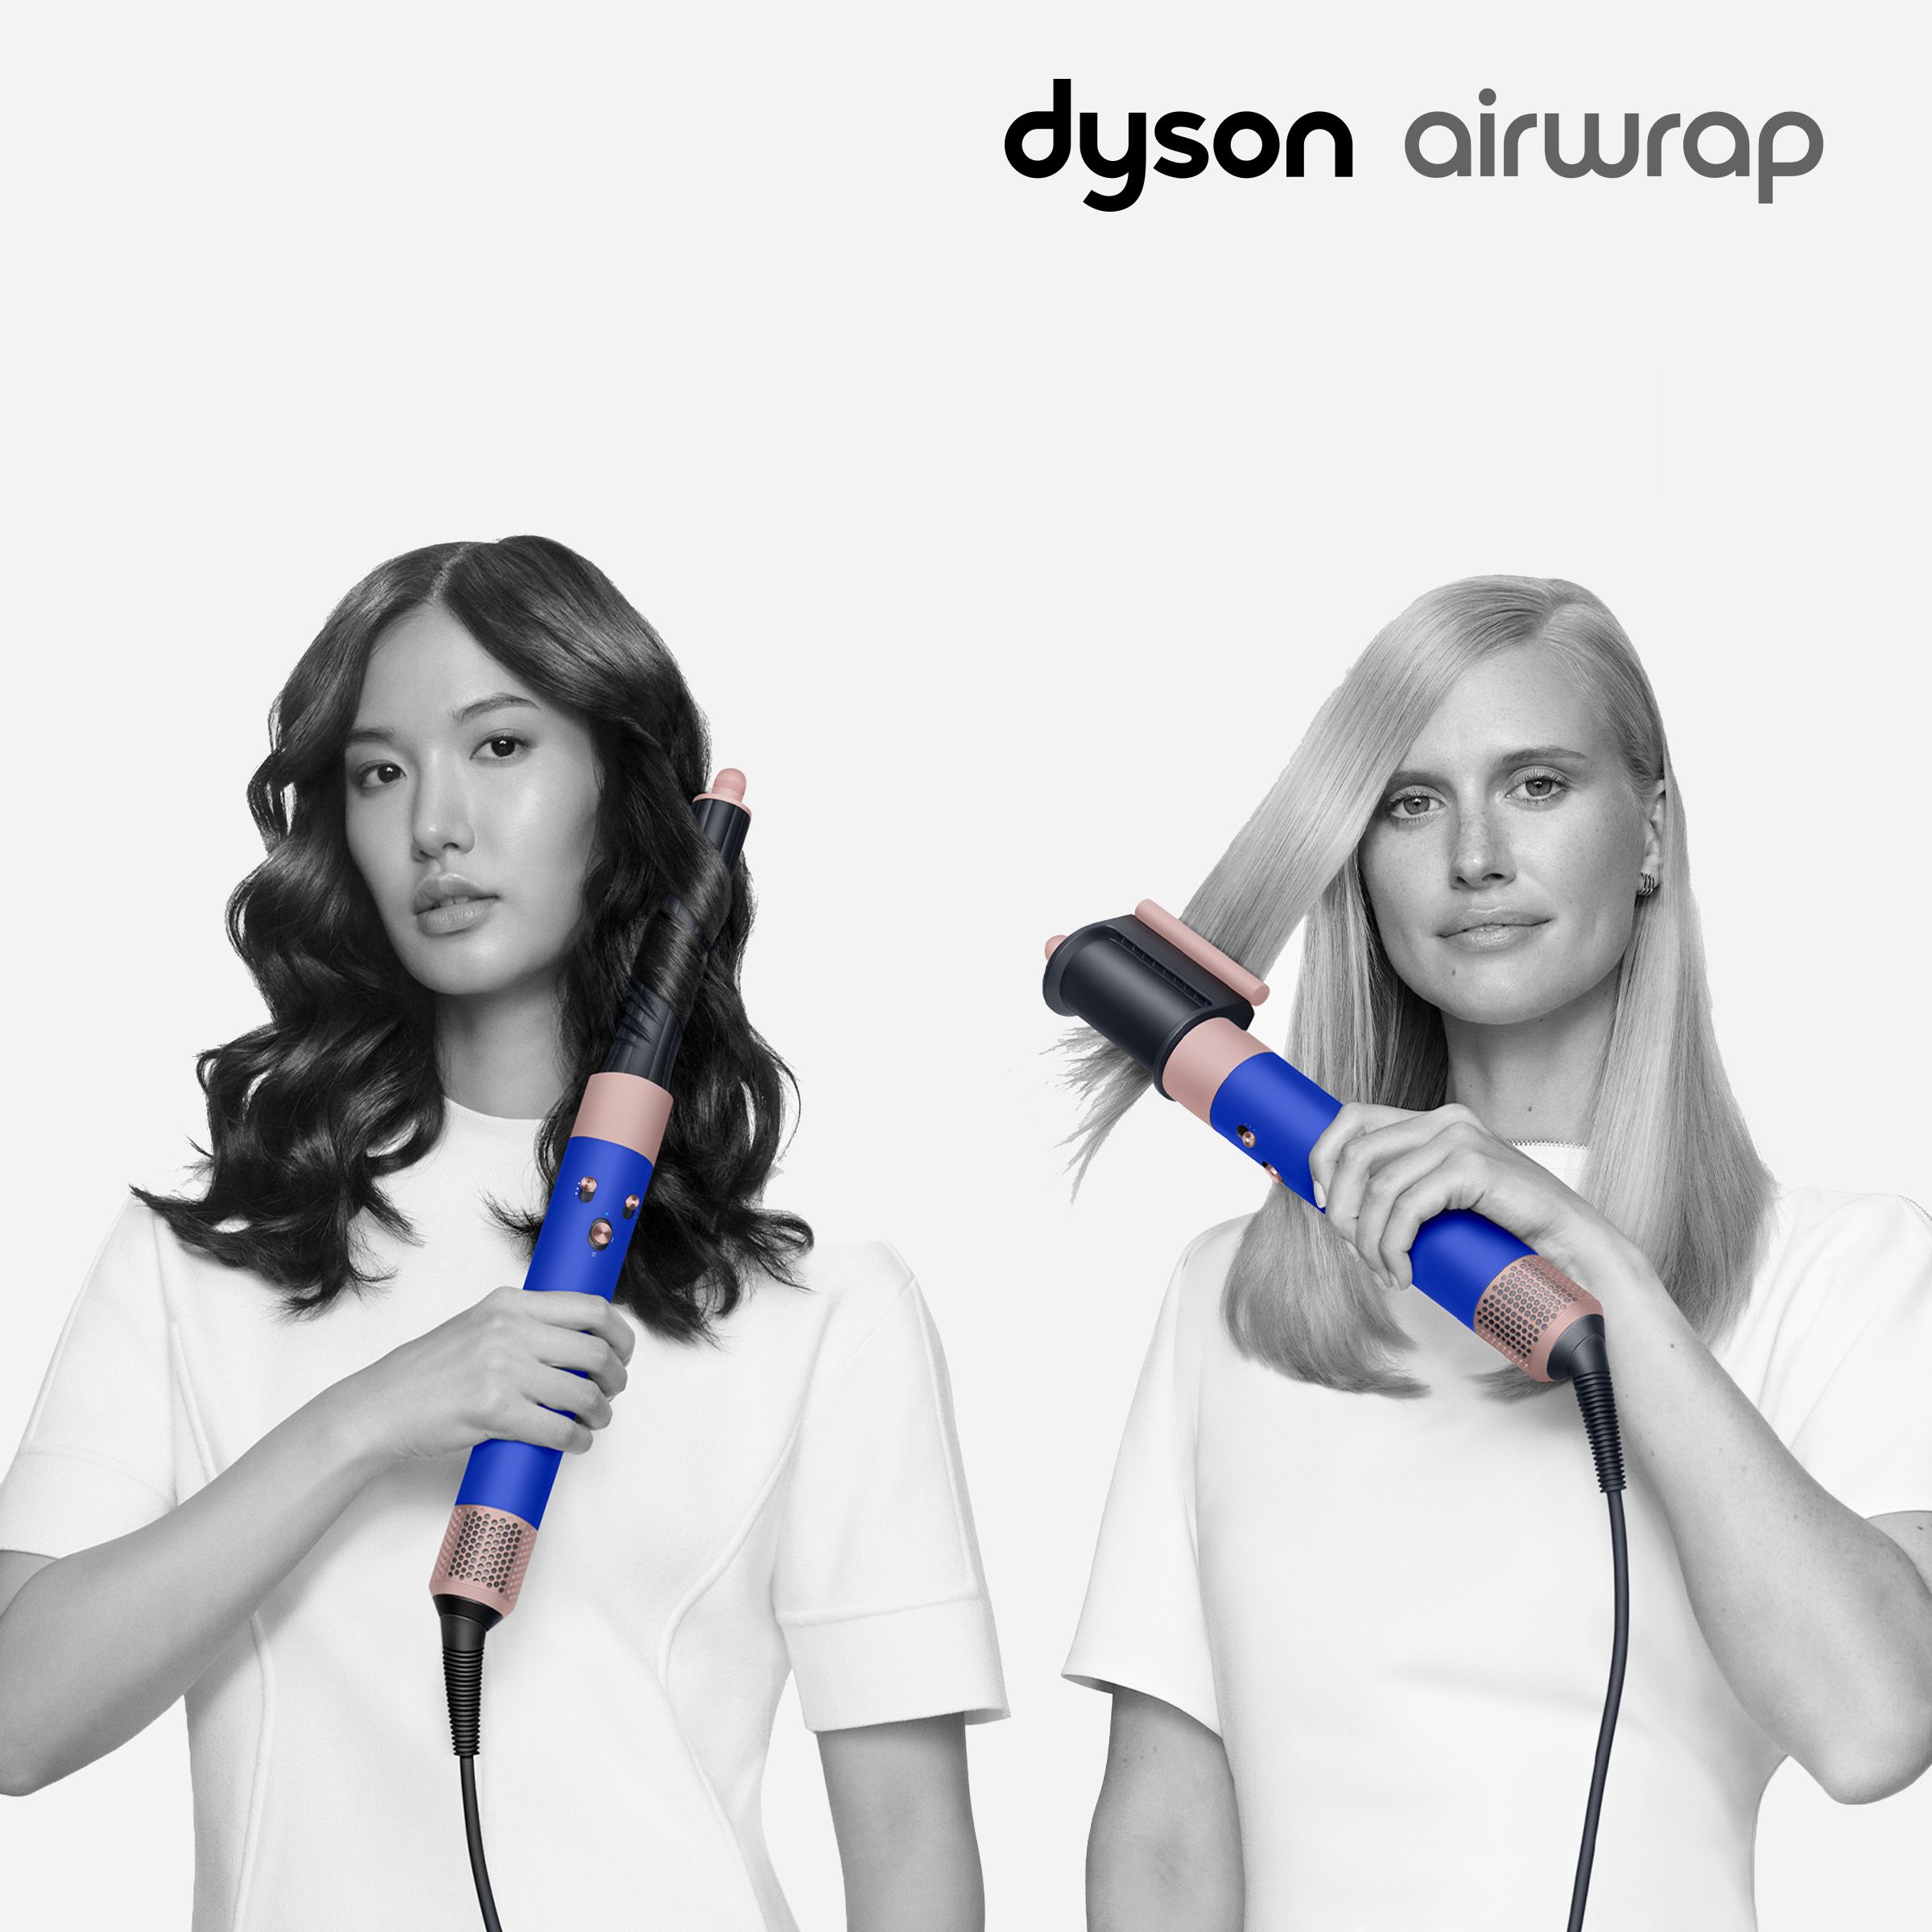 Give the gift of invention with Dyson AirwrapTM multi-styler